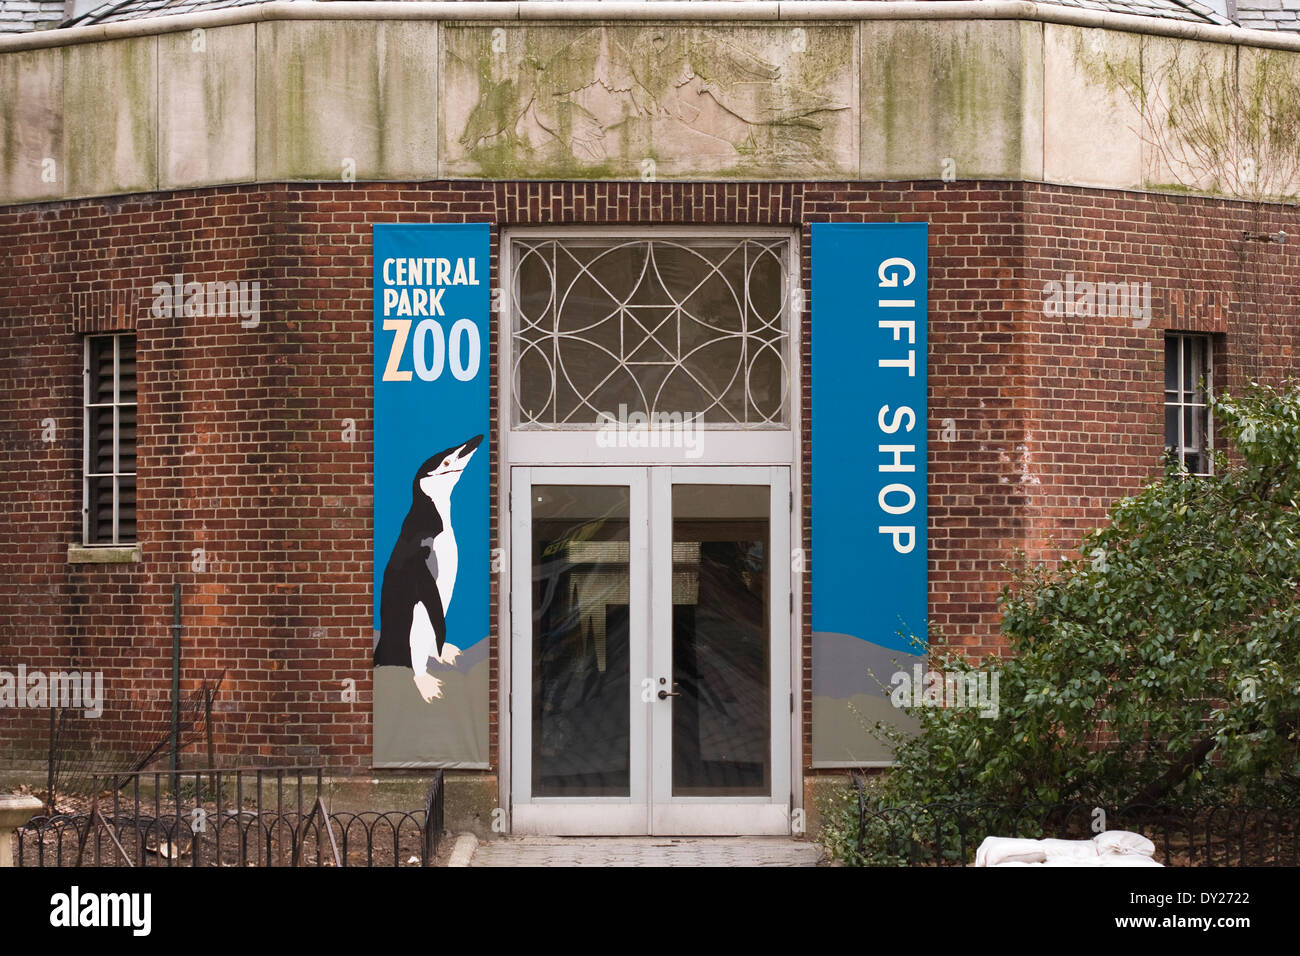 Entrance to the Central Park Zoo Gift Shop located in Central Park, New York City Stock Photo